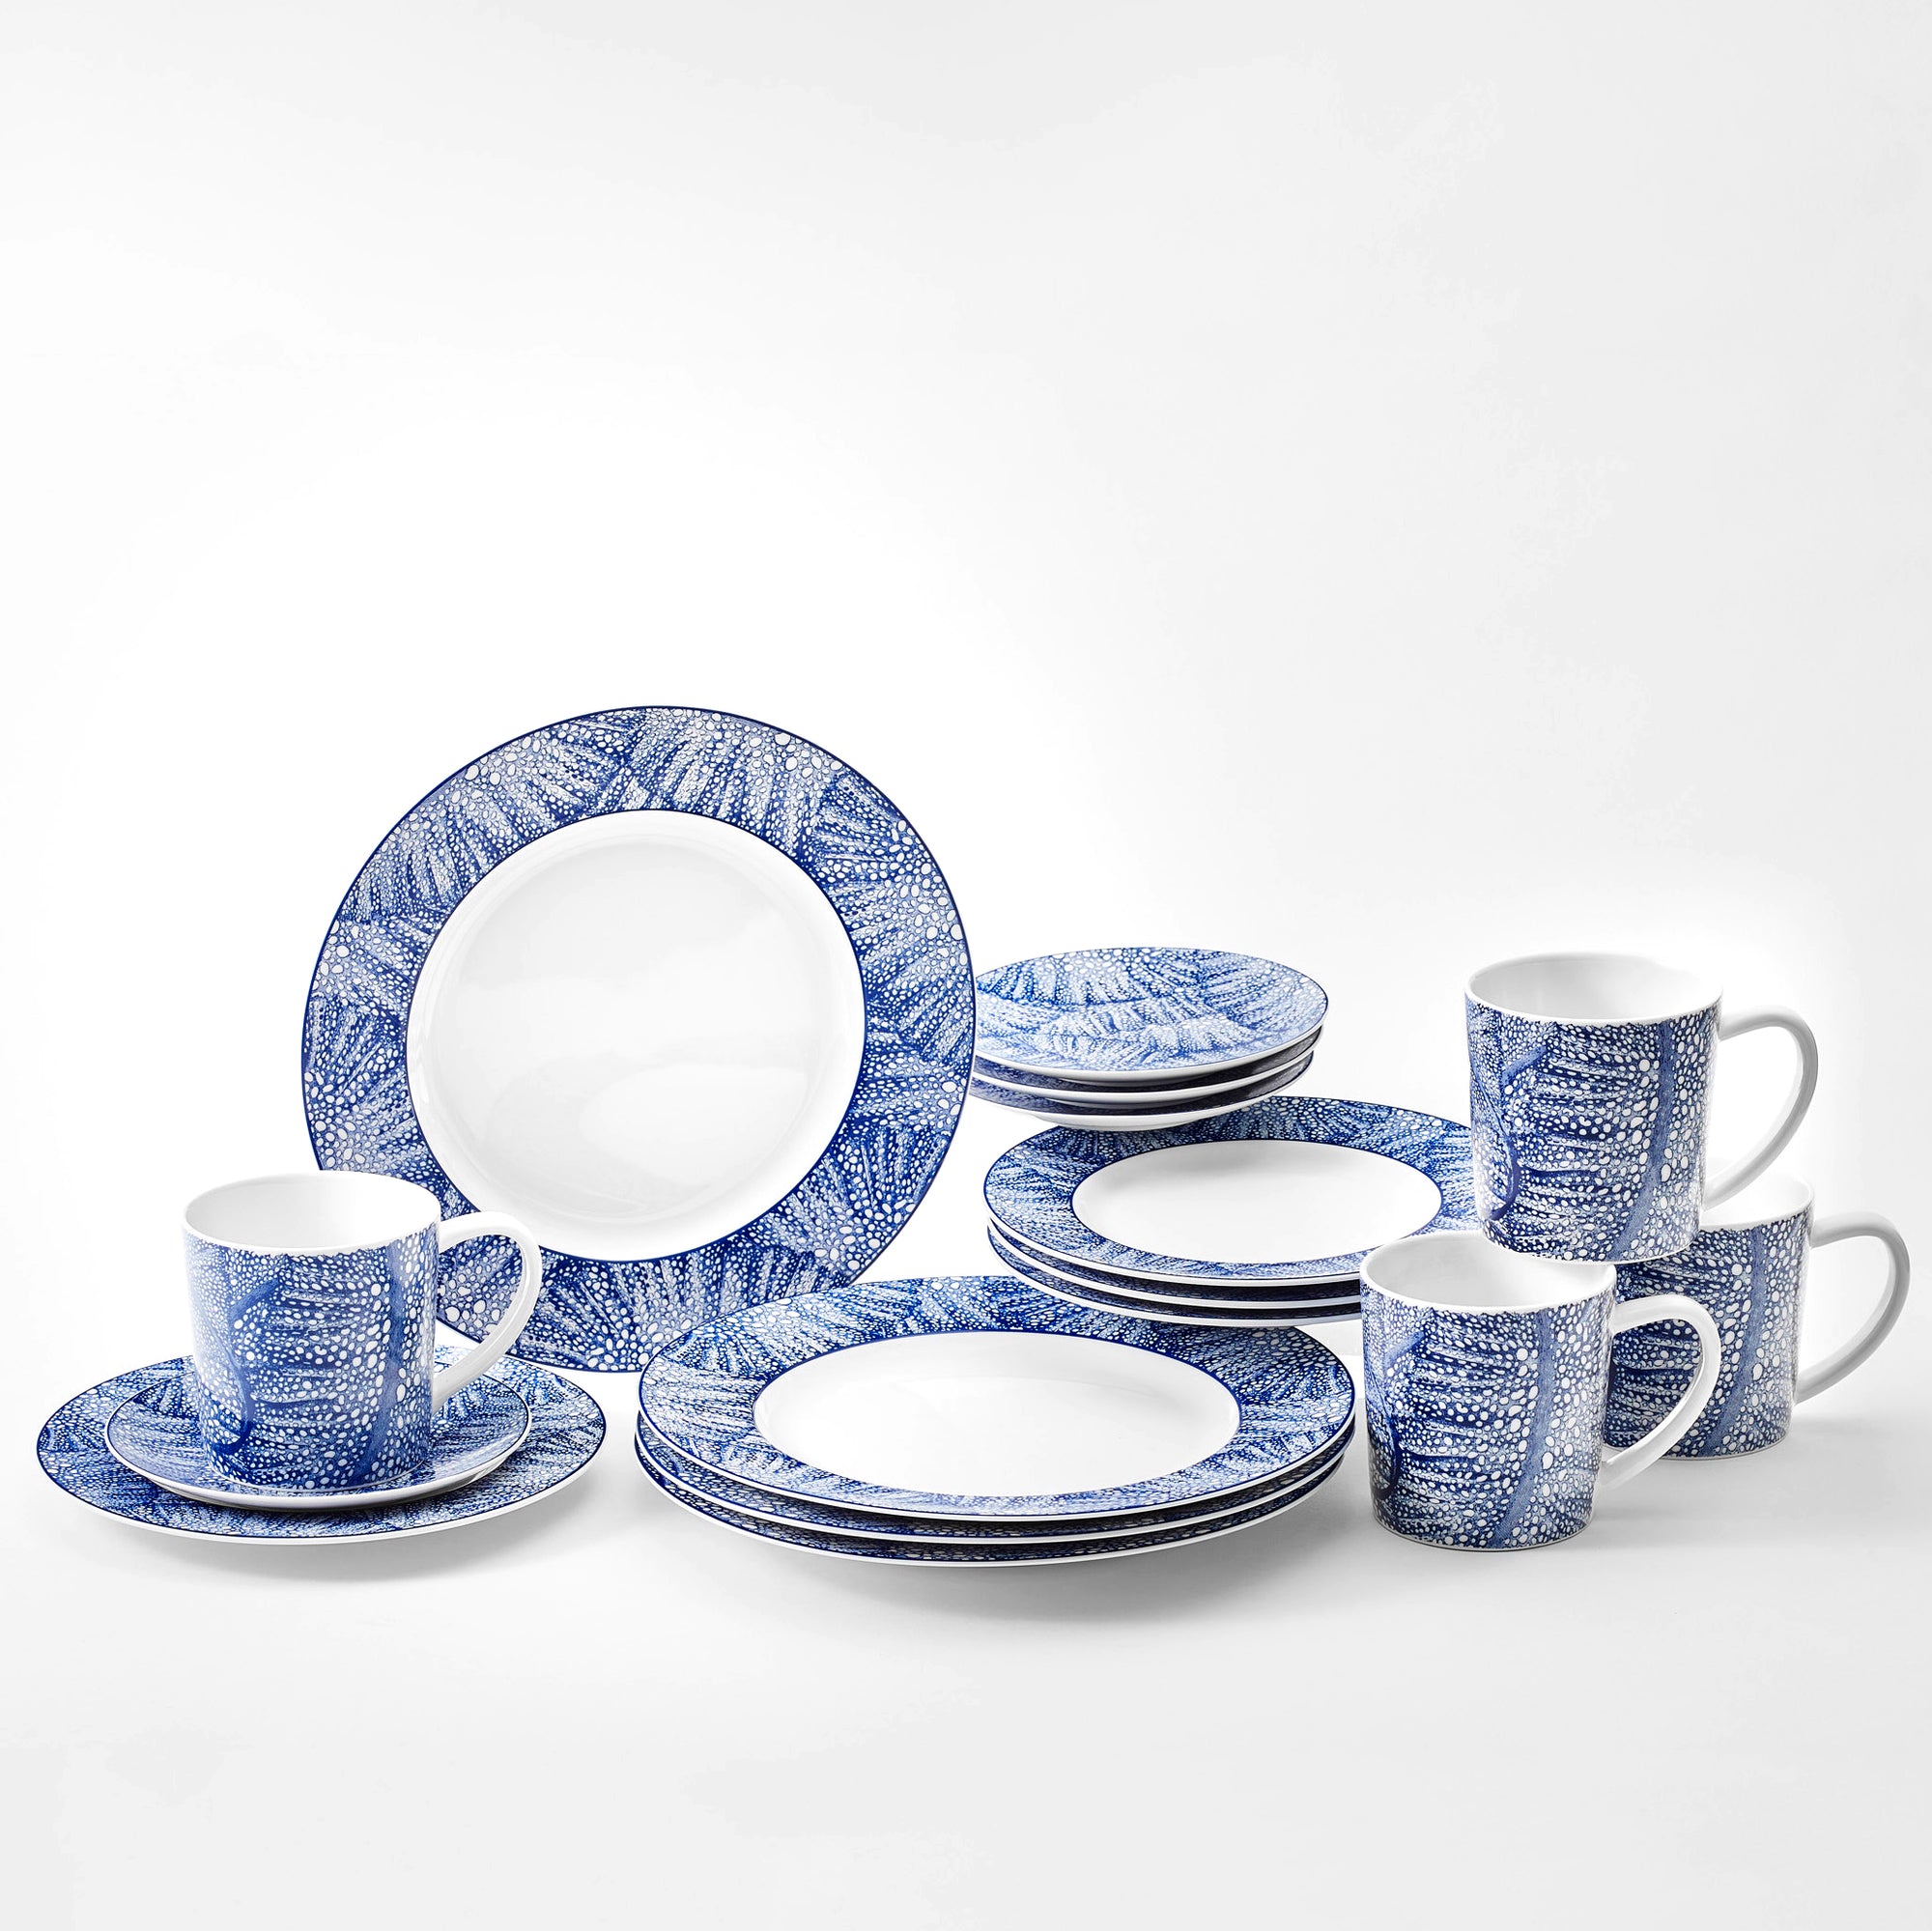 SeaFan 16 piece dinnerware set in blue and white porcelain from Caskata